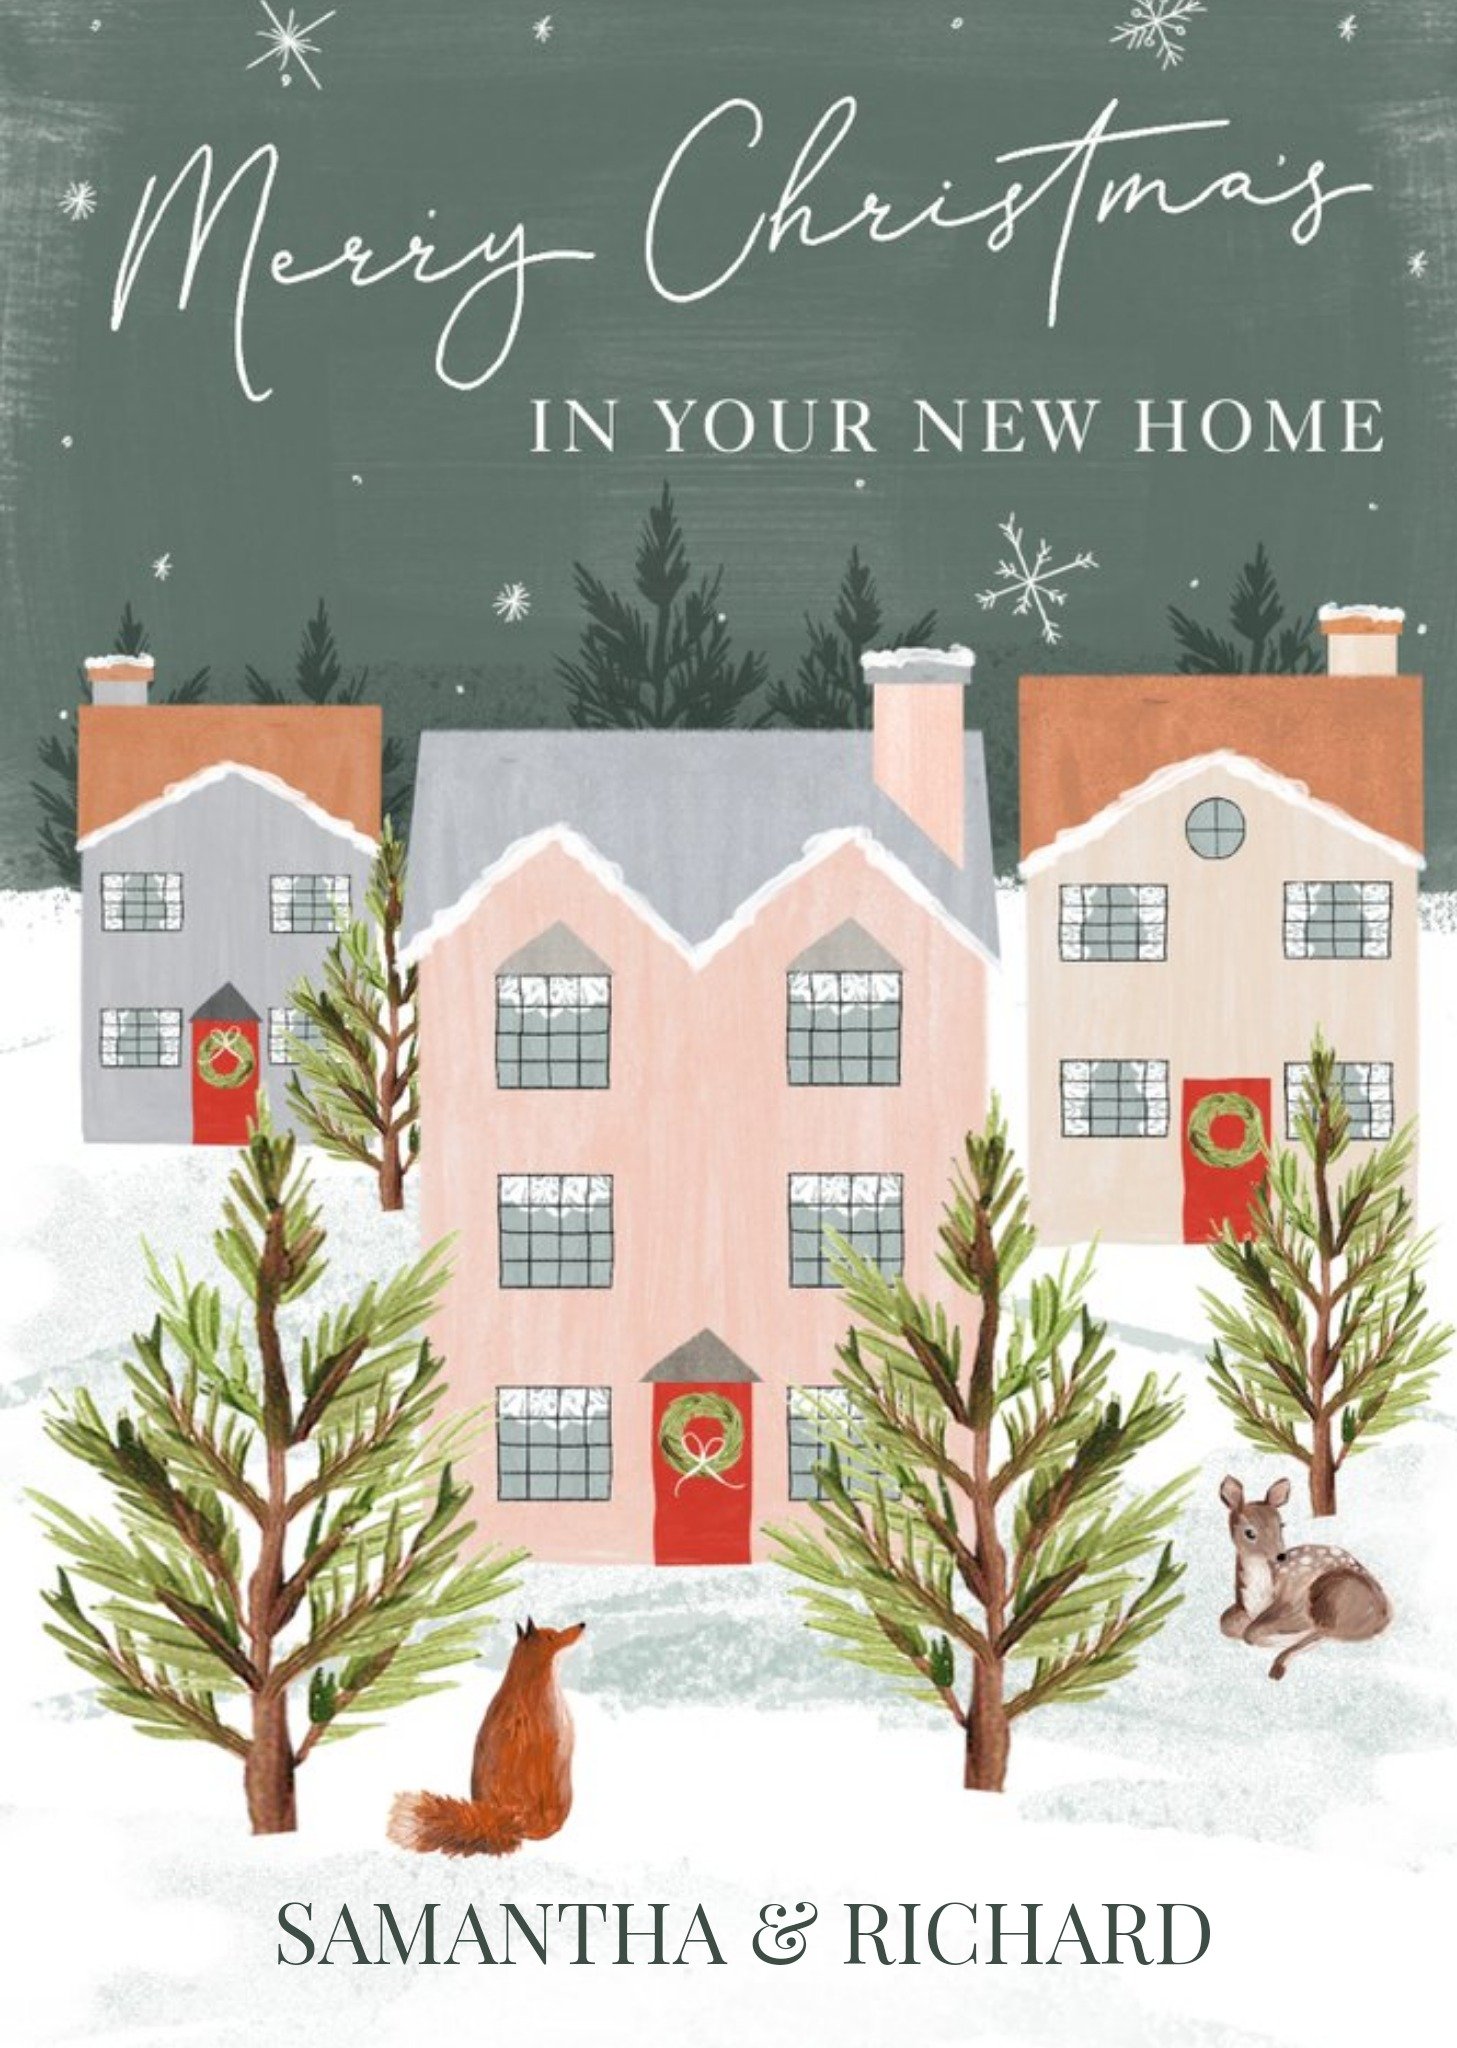 Moonpig Illustration Of A Winter Scene New Home Christmas Card, Large